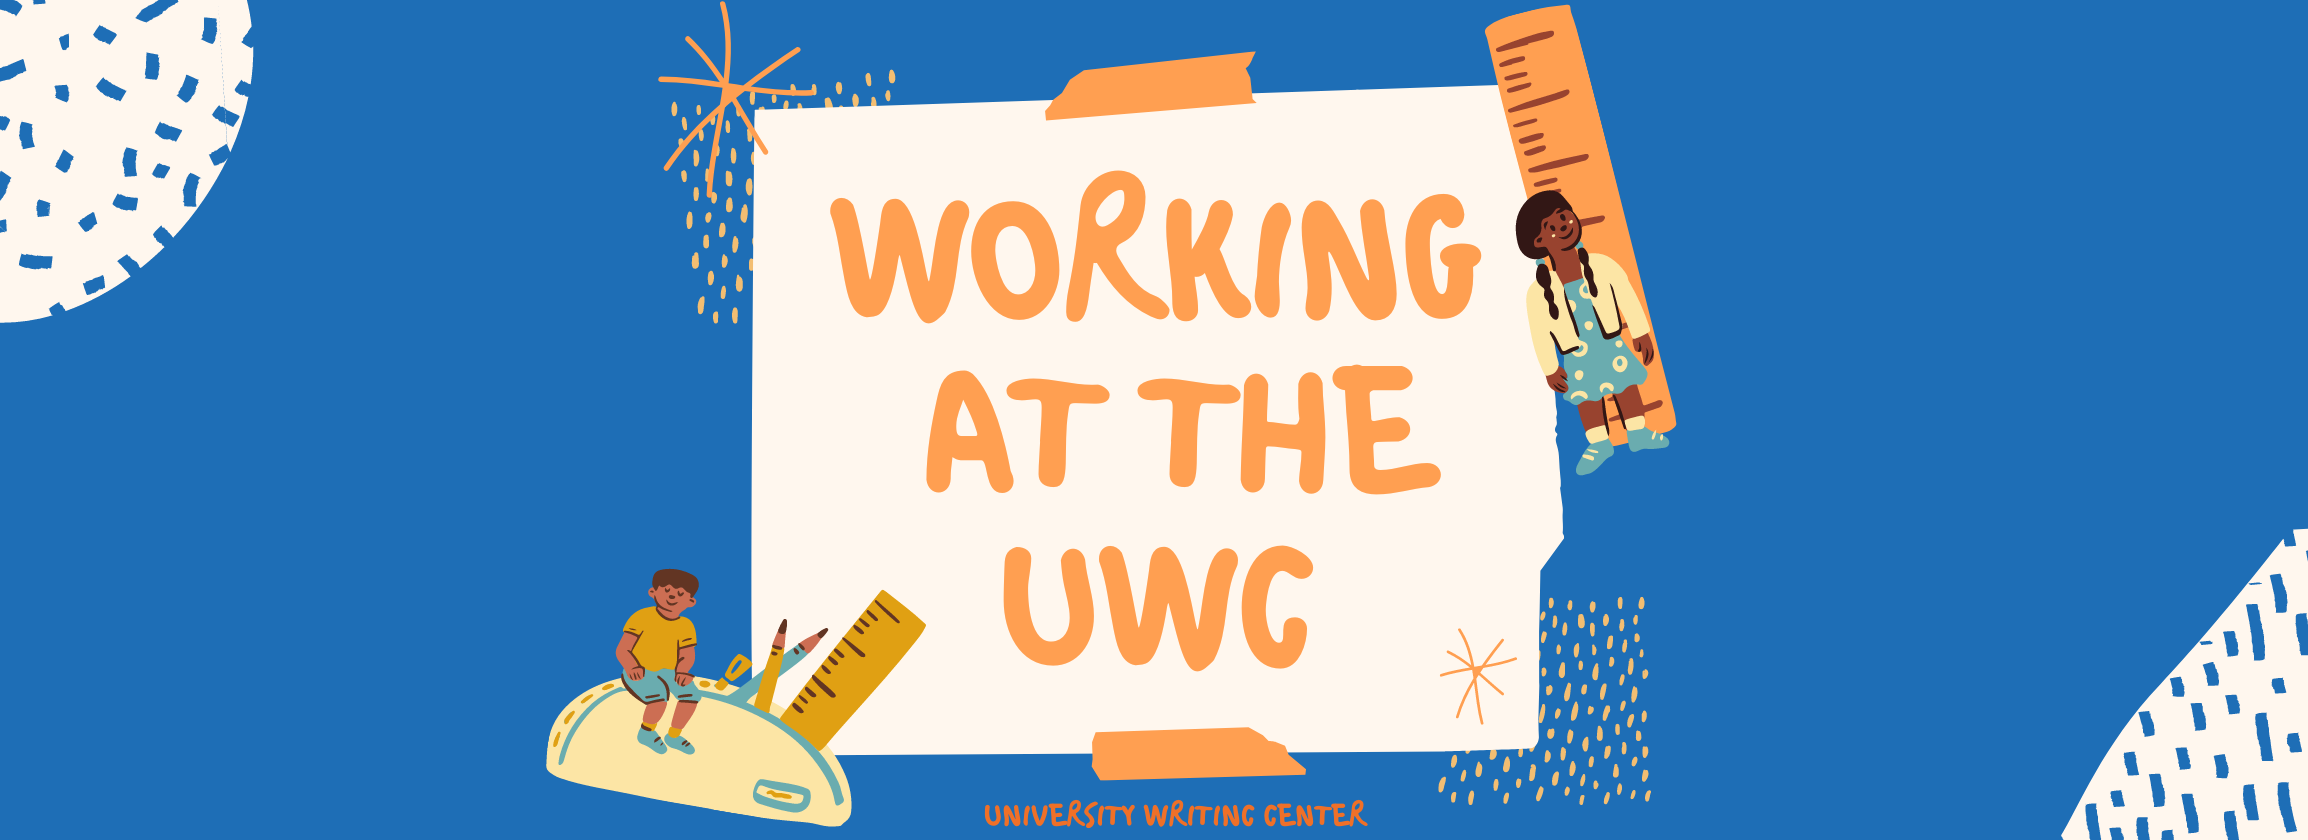 Working at the UWC